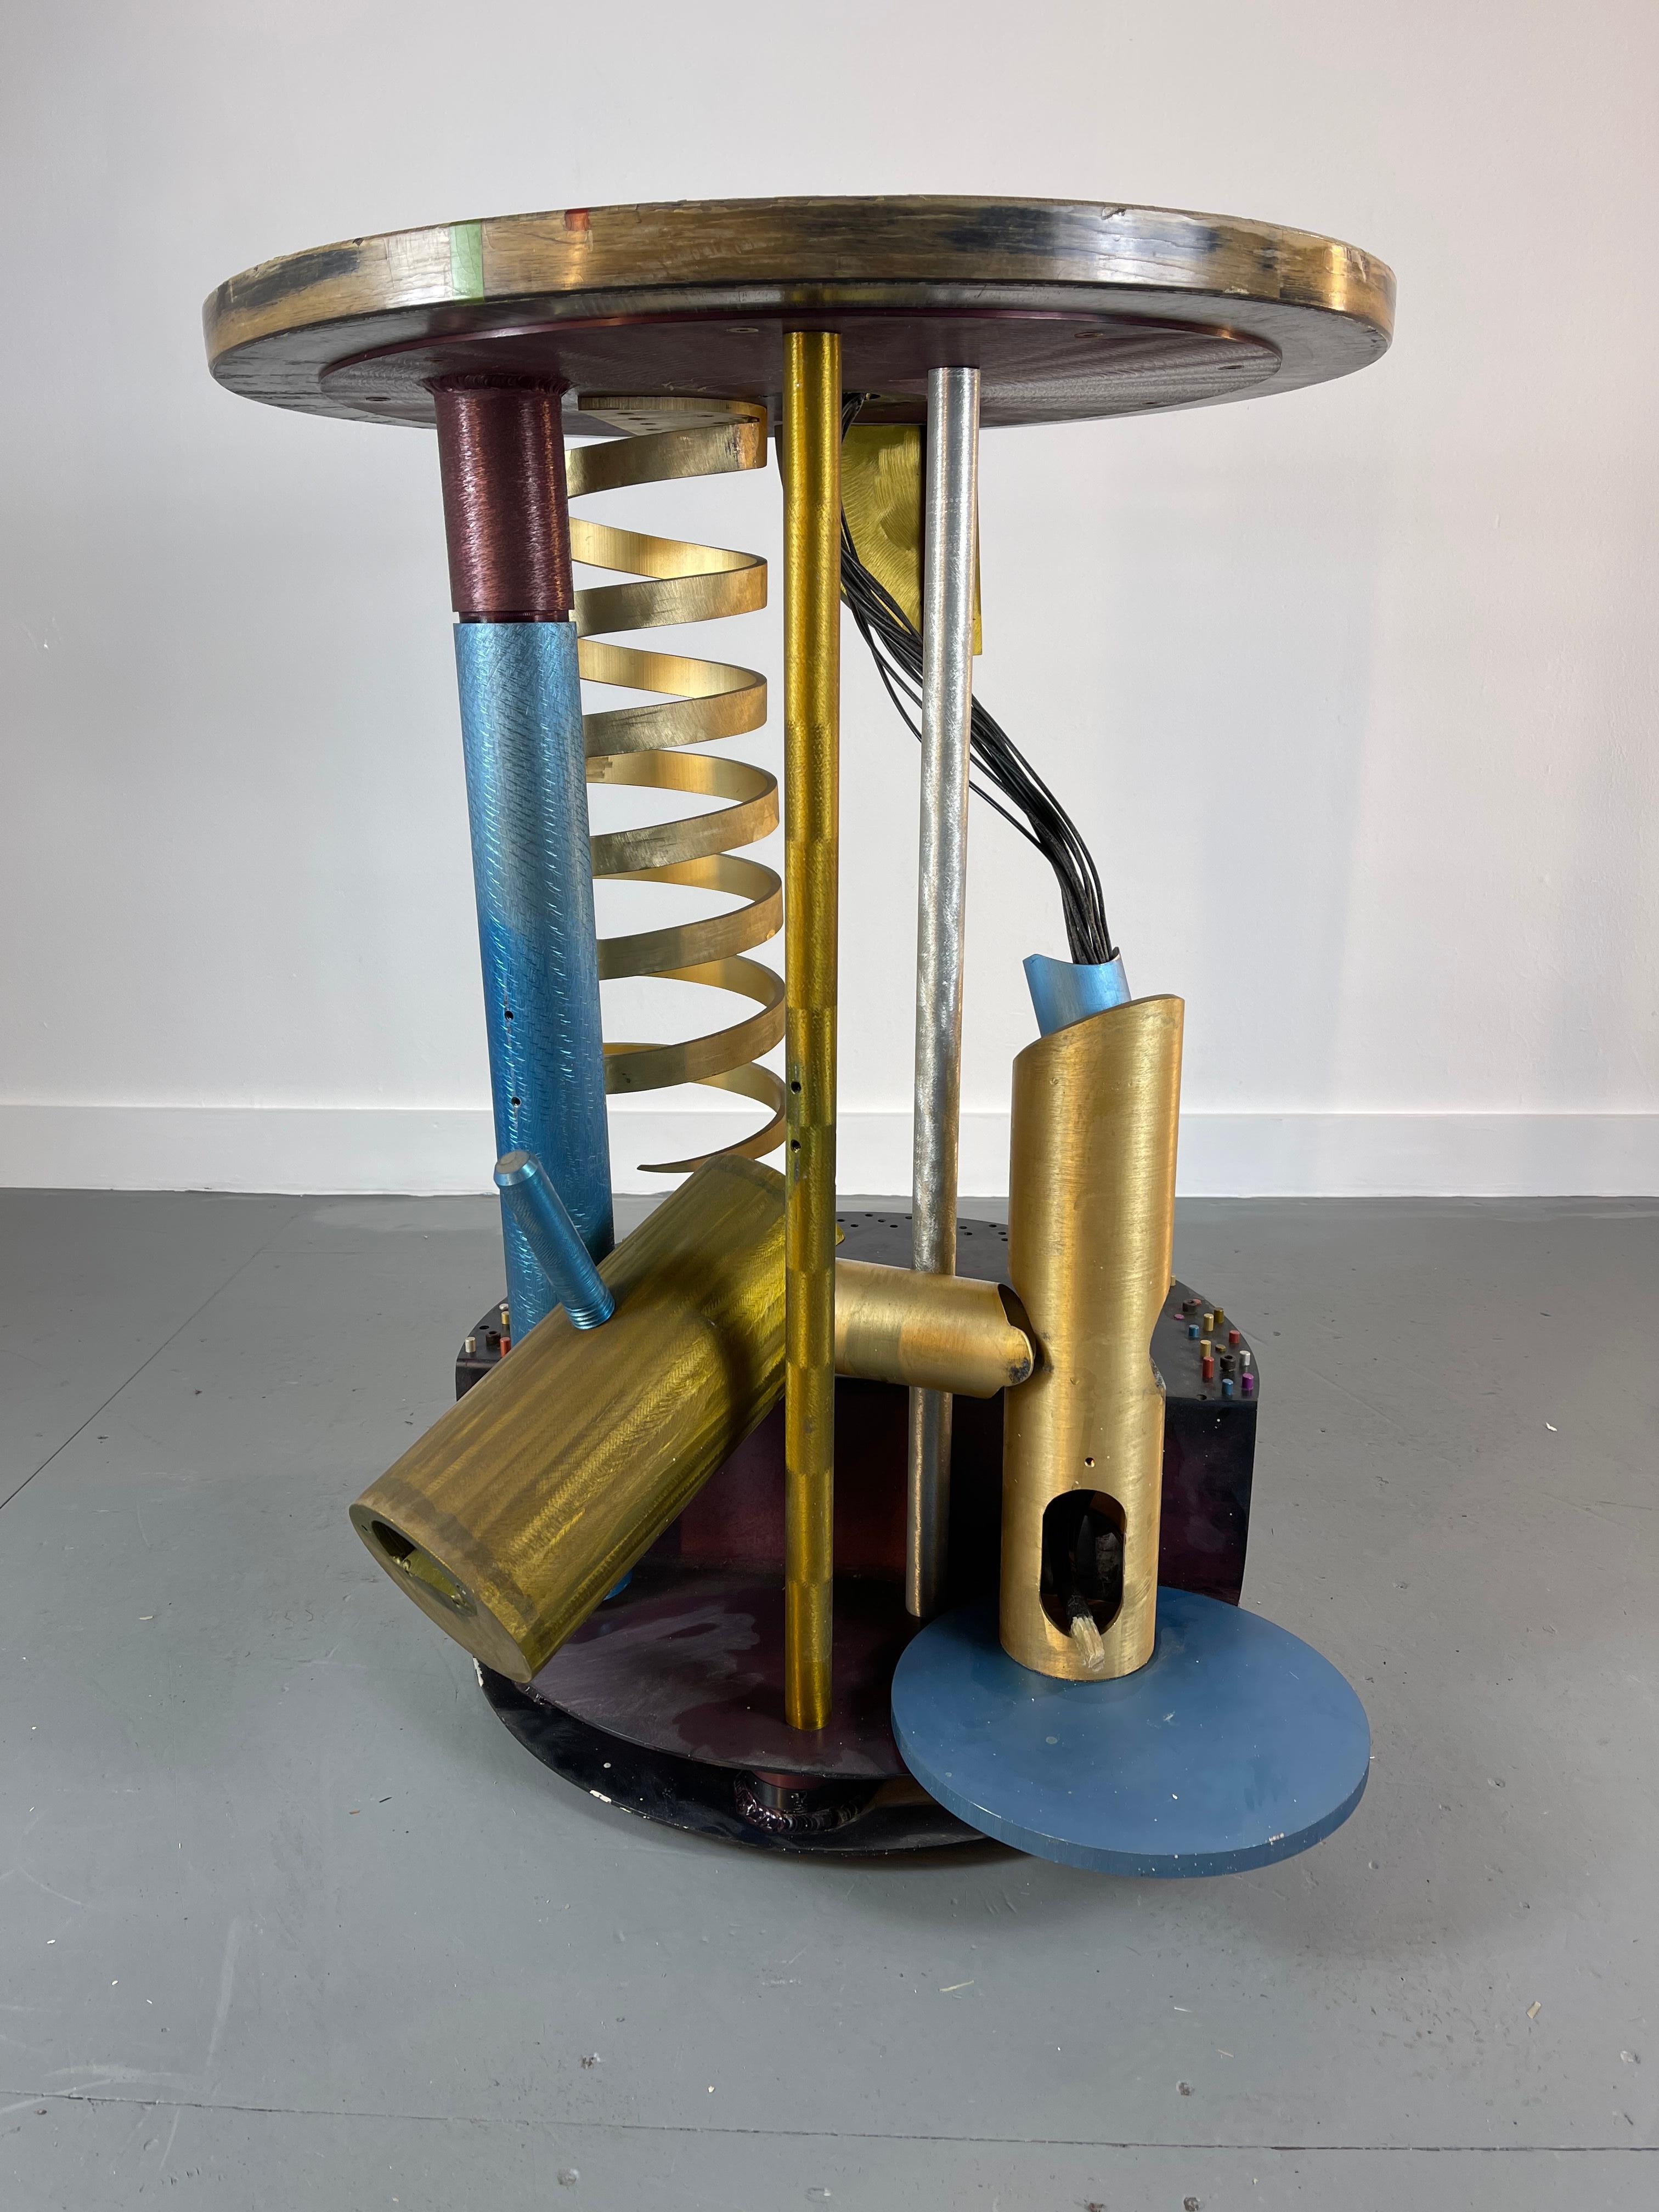 Futurist Memphis Style Industrial Table / Sculpture, by Jay Stanger, , Aluminum, Wood, Fiber For Sale